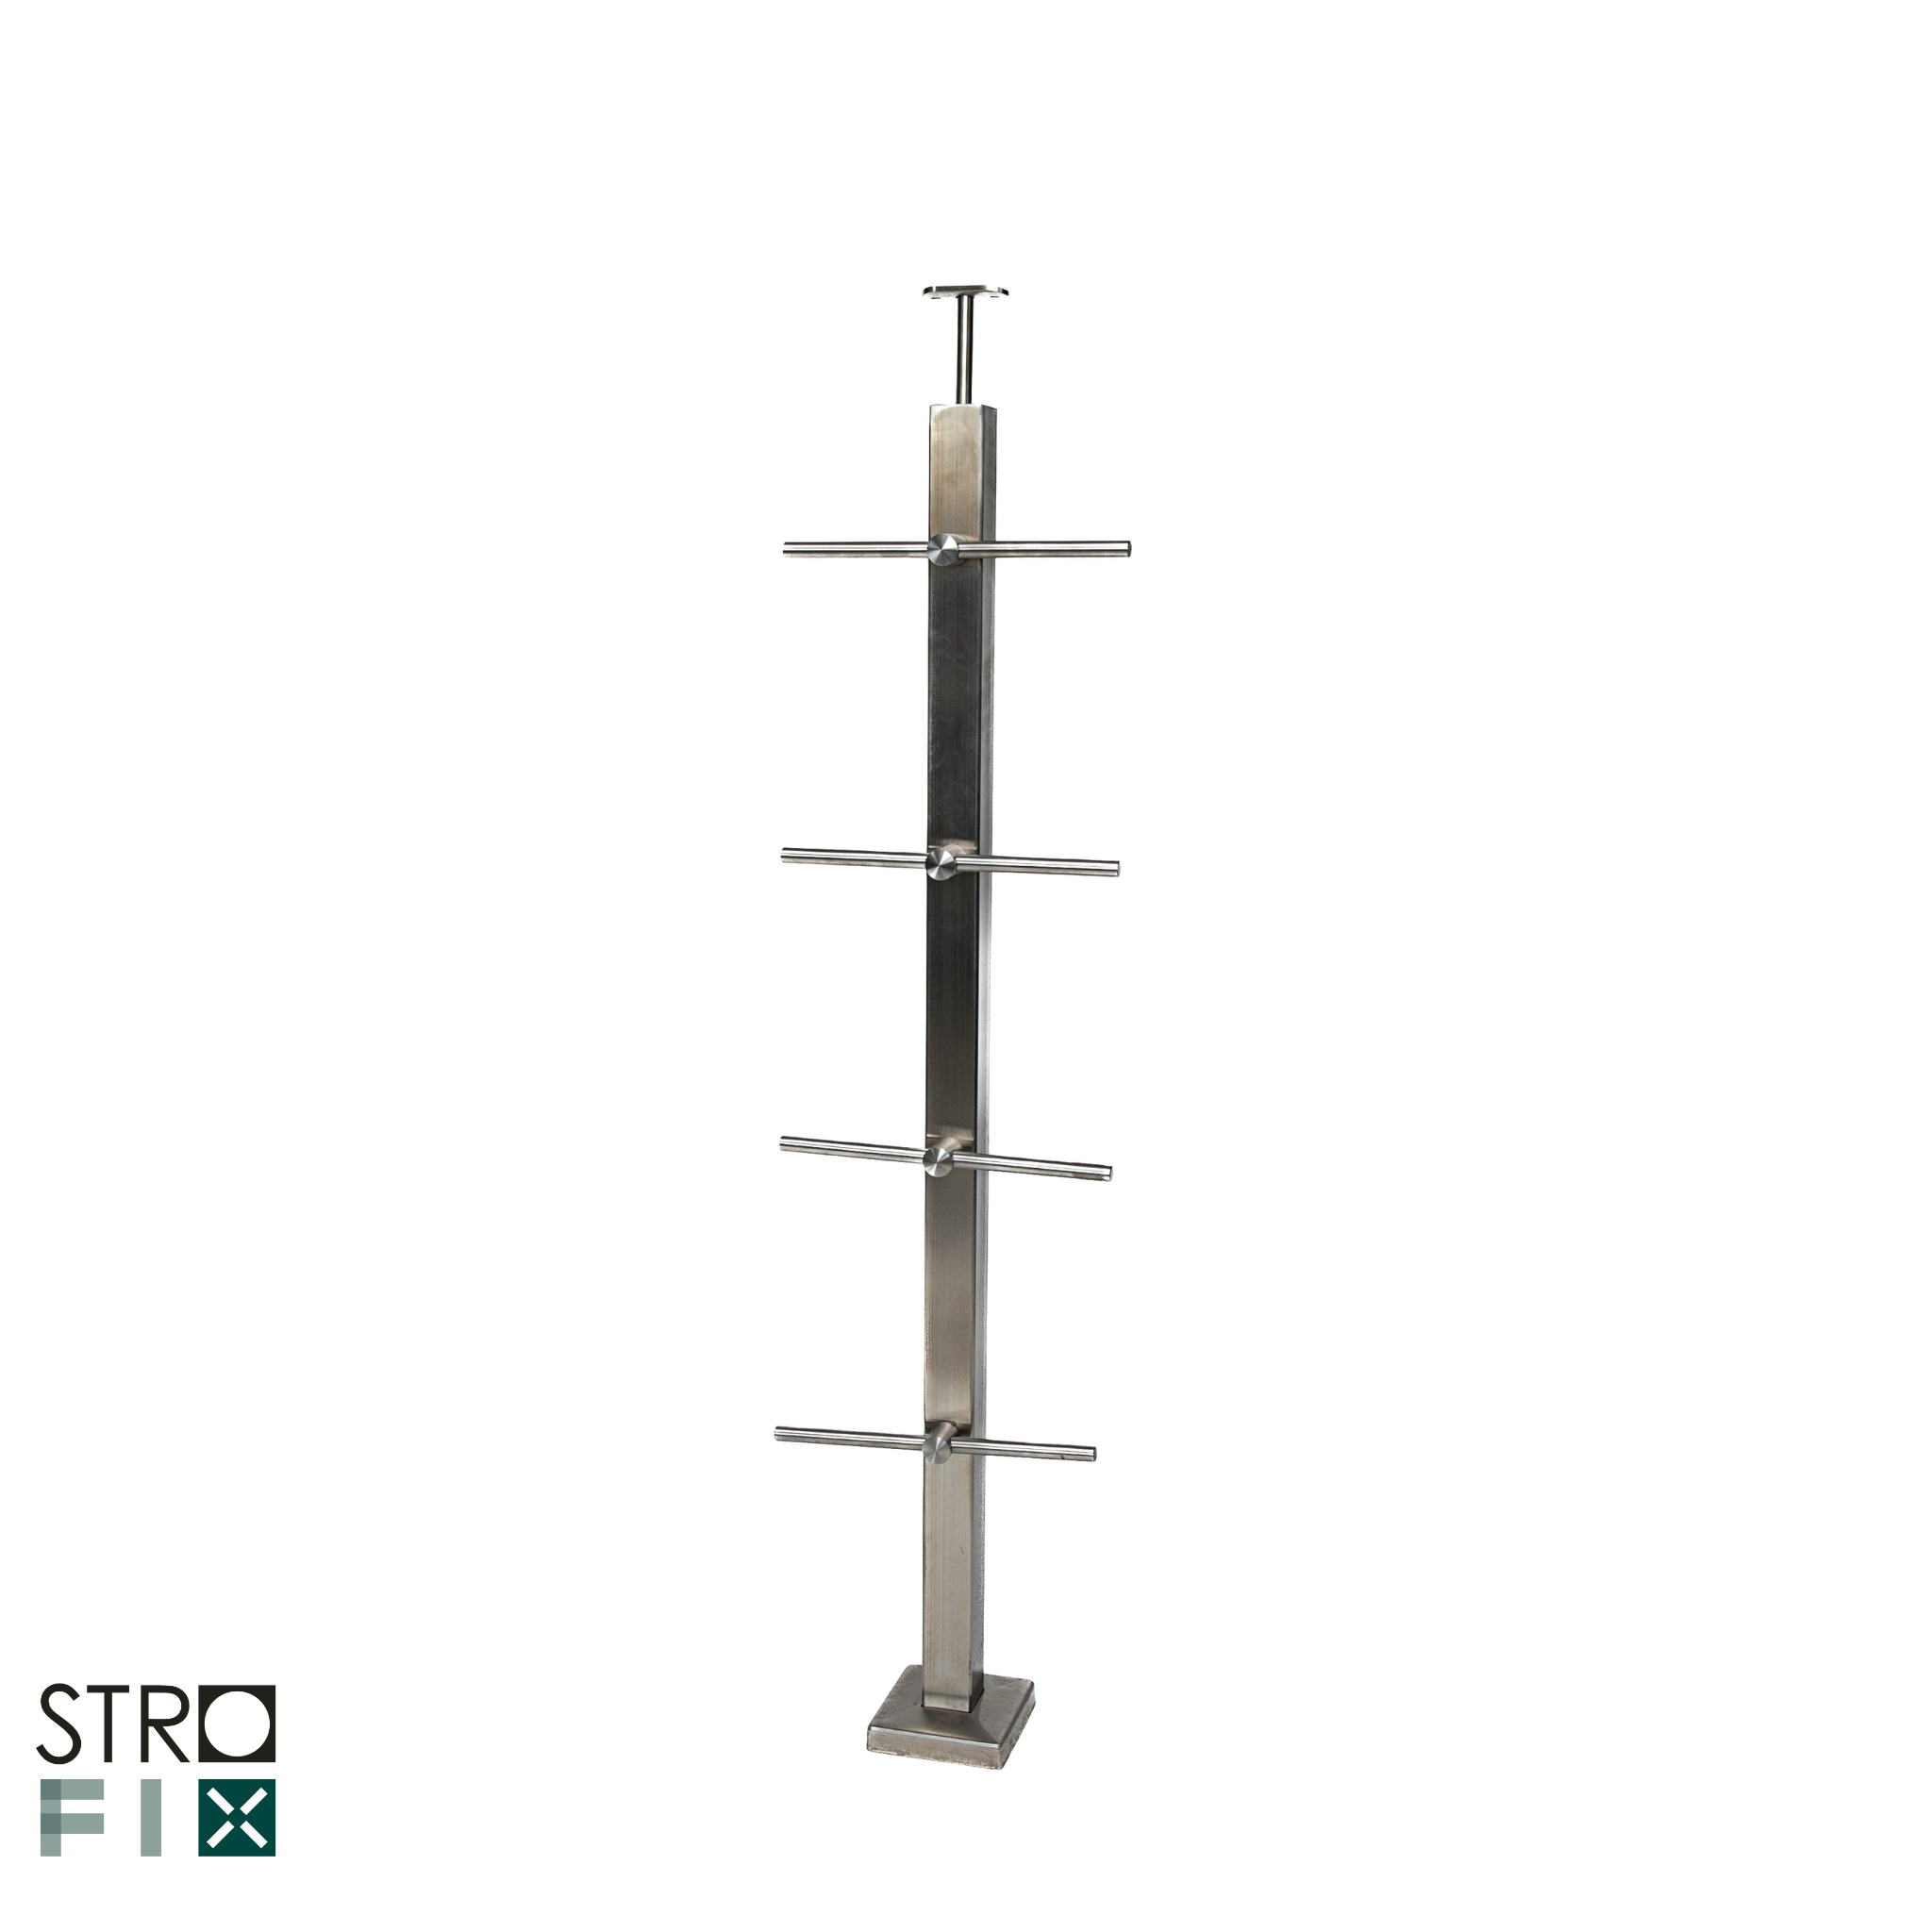 Rod railing system for a flat surface - 42.4 - StroFIX